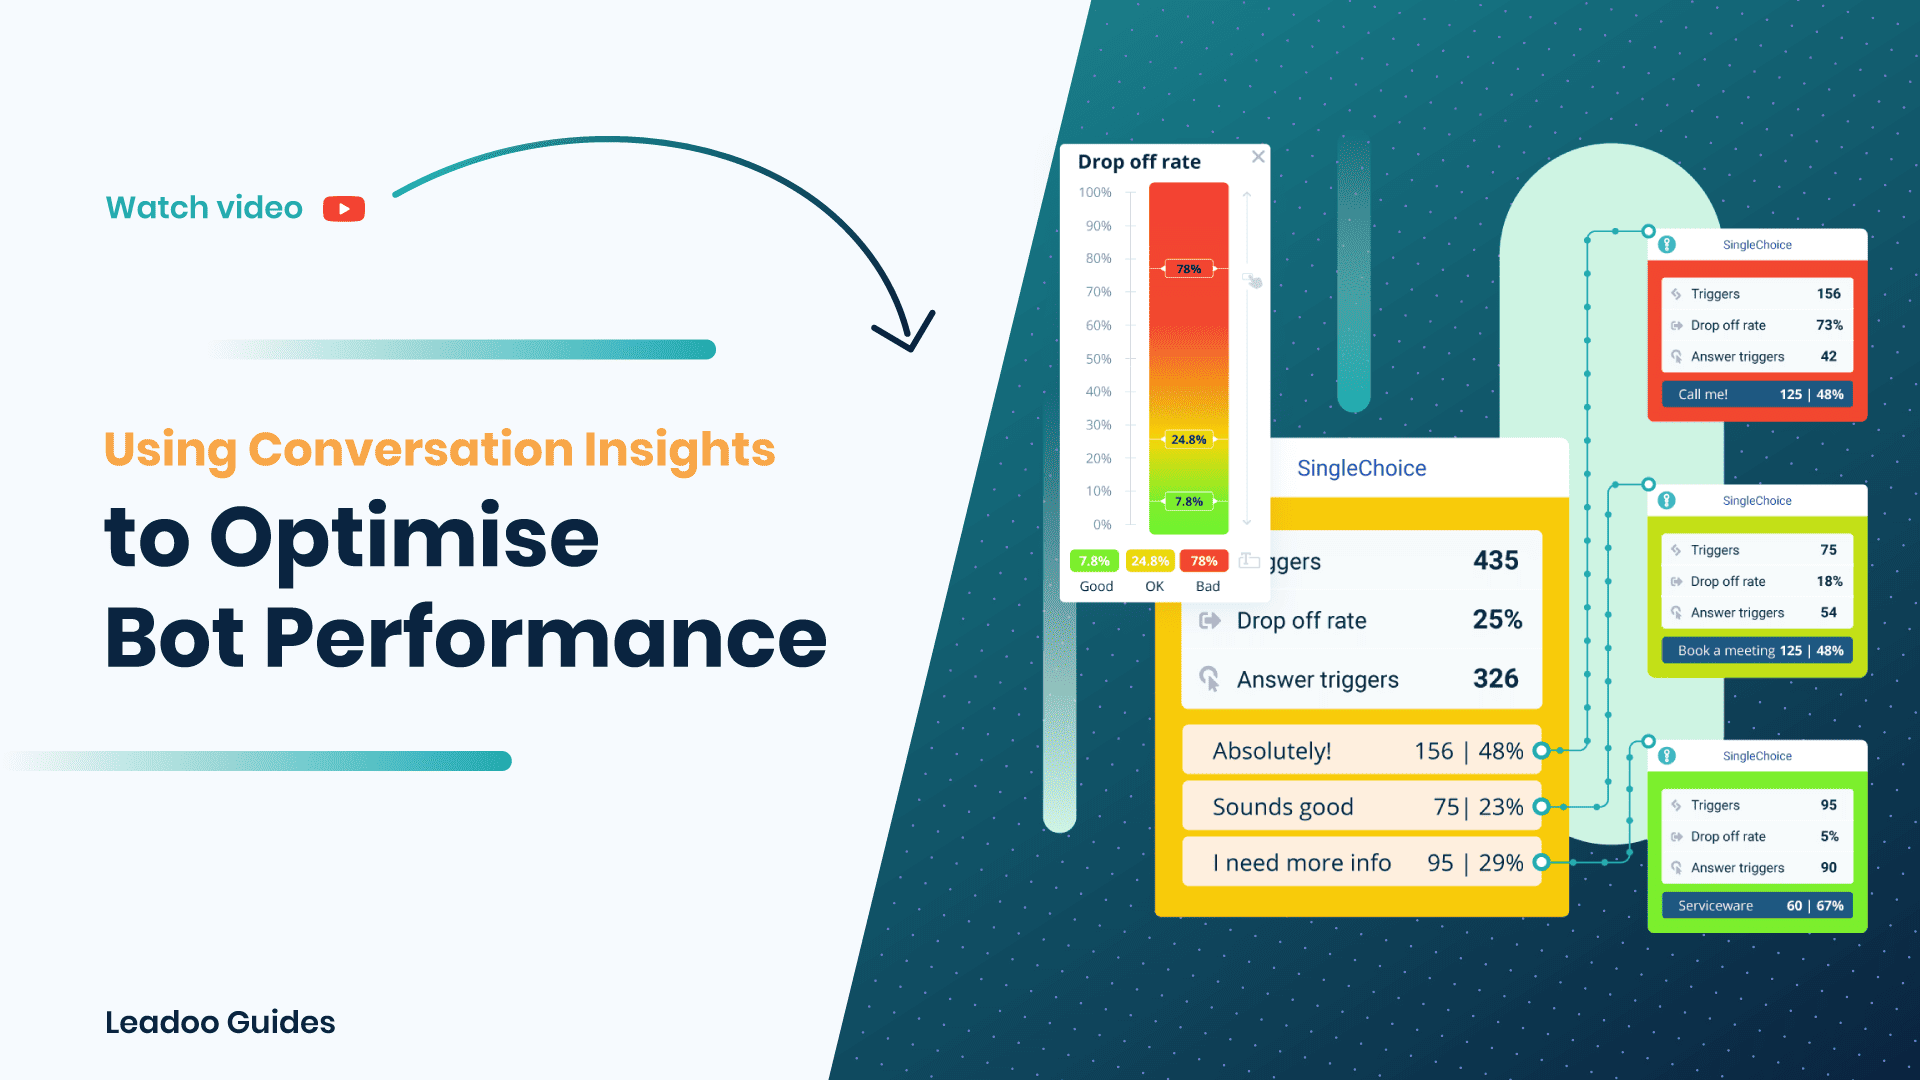 Optimize bot performance vid How to optimise Bots (Conversion Insights)